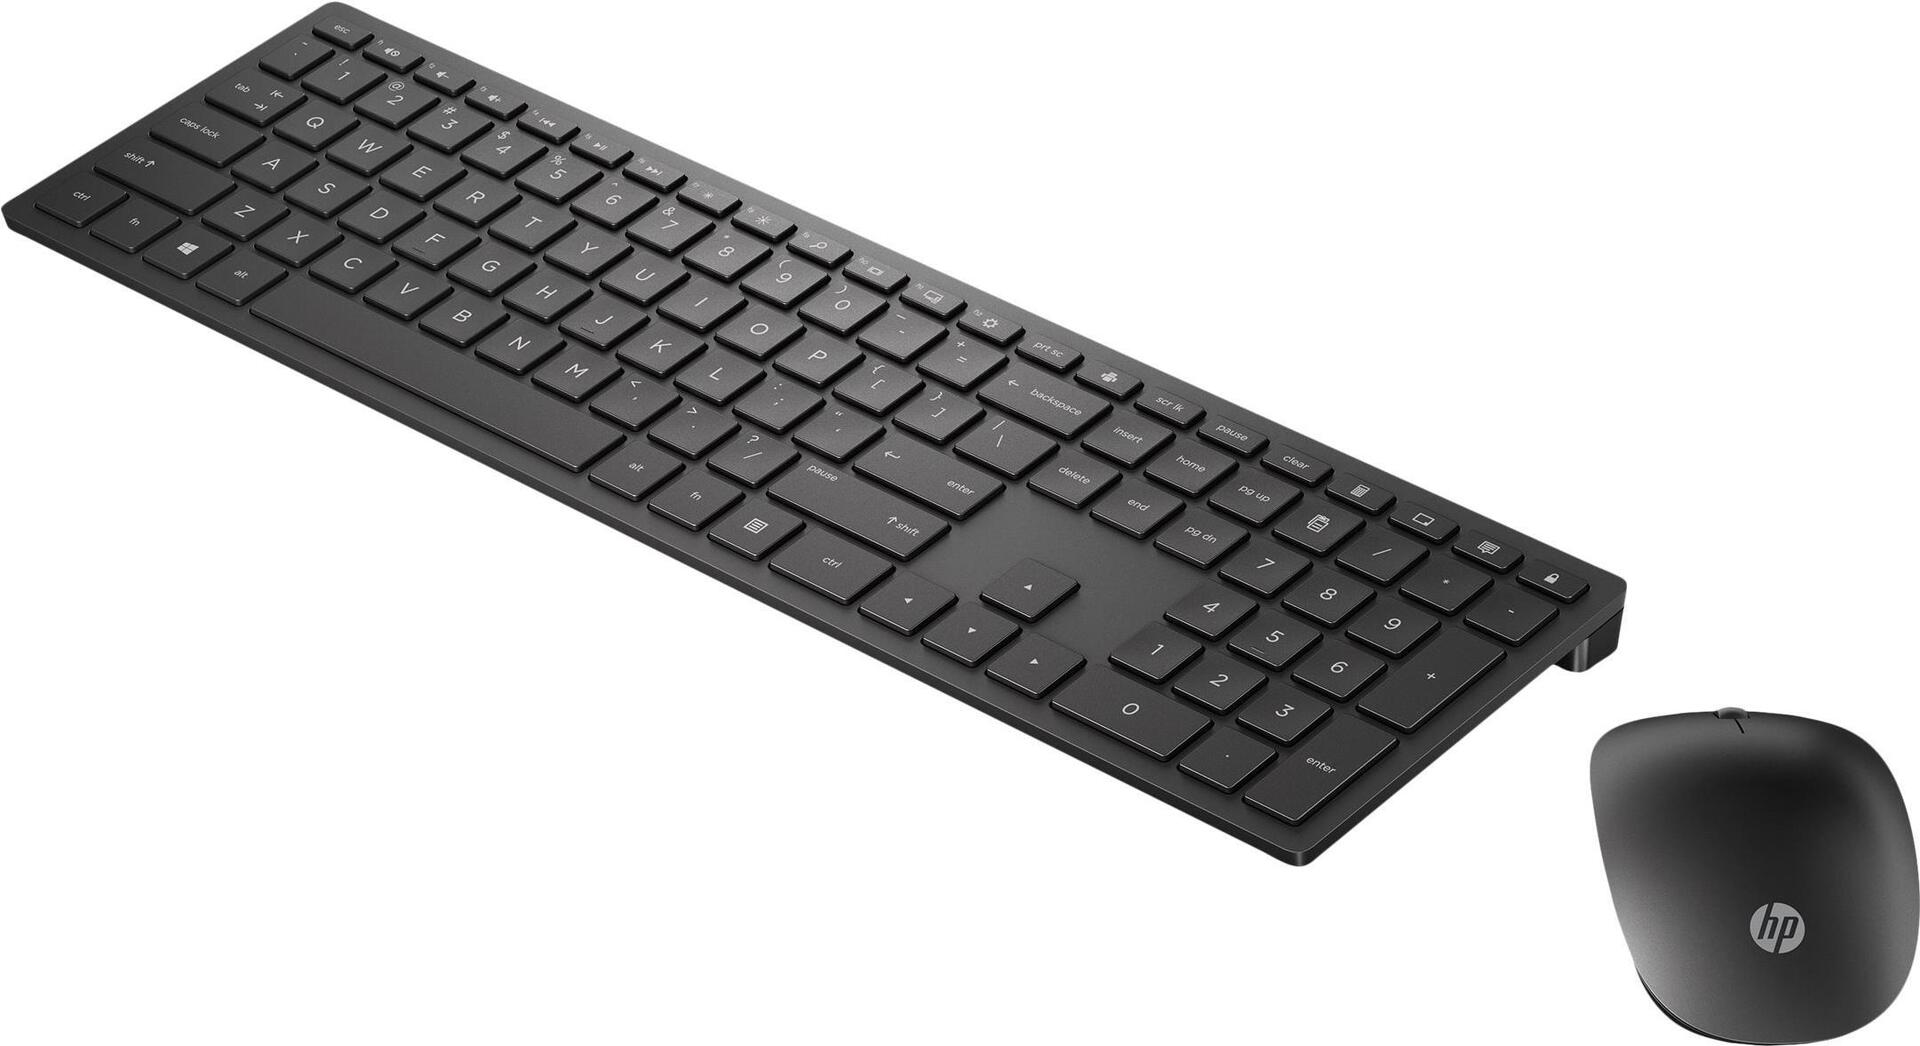 HP Pavilion 800 Keyboard and mouse set (4CE99AA#ABB)